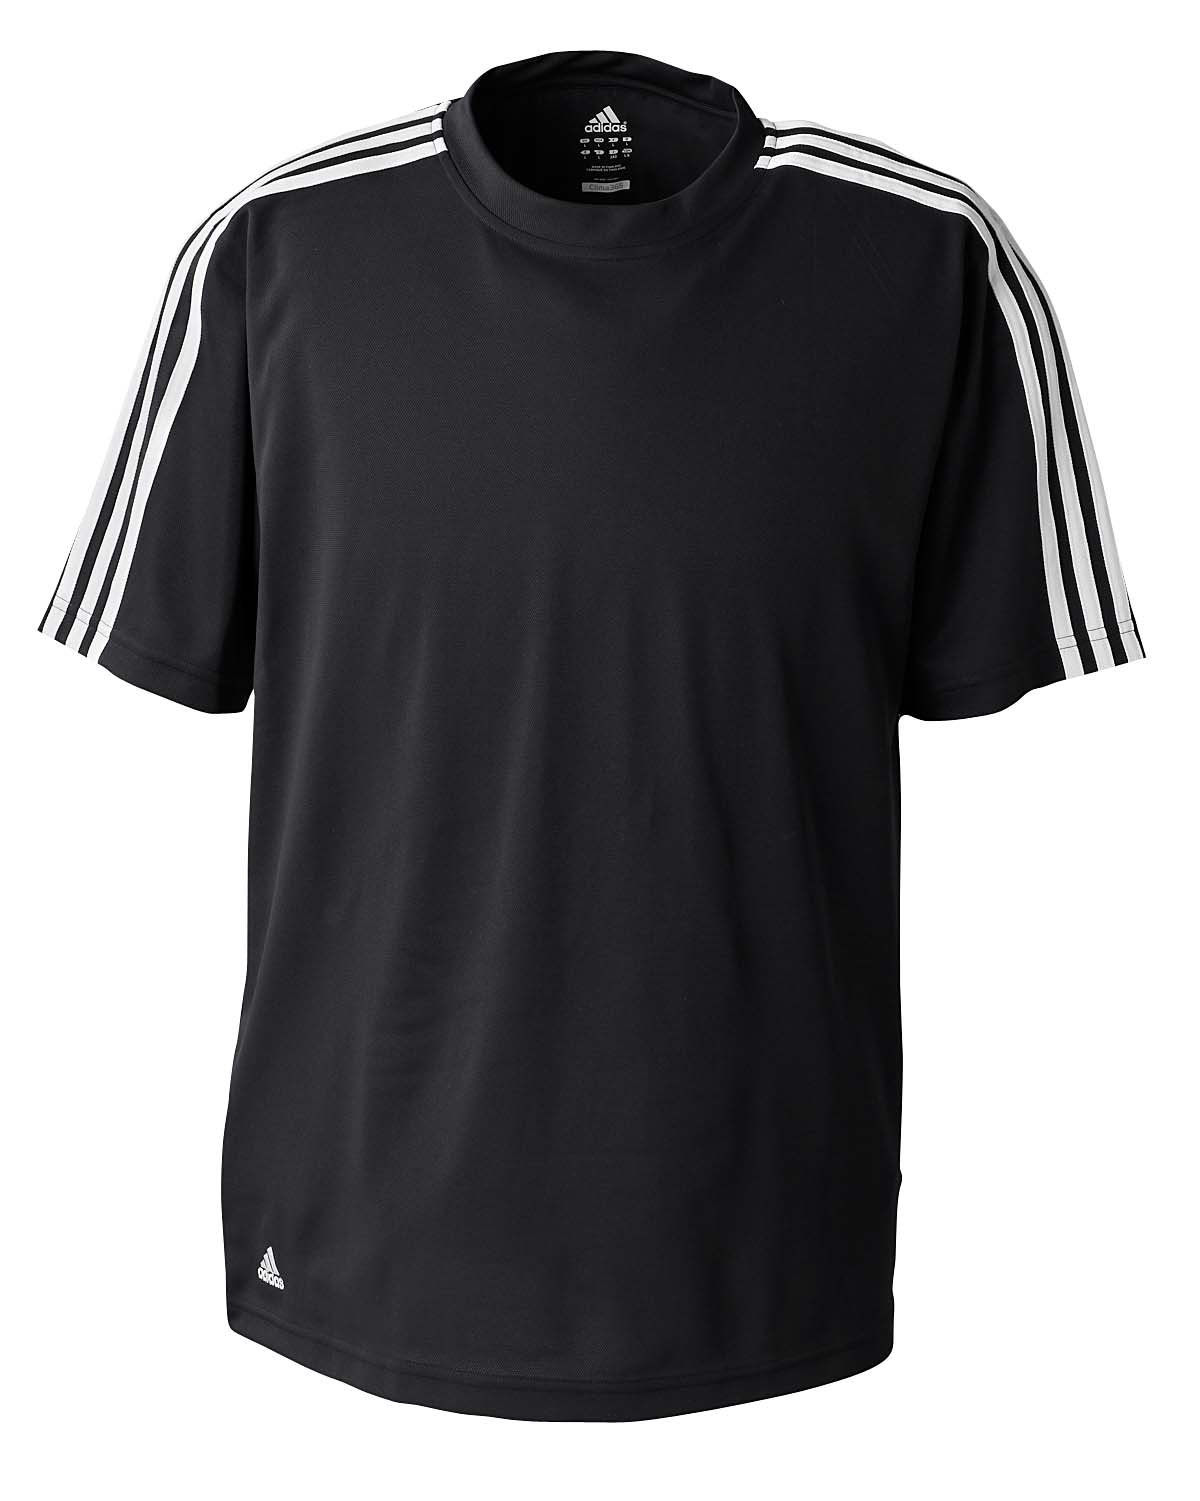 Buy Mens Climalite 3 Stripes T Shirt Adidas Golf Online At Best